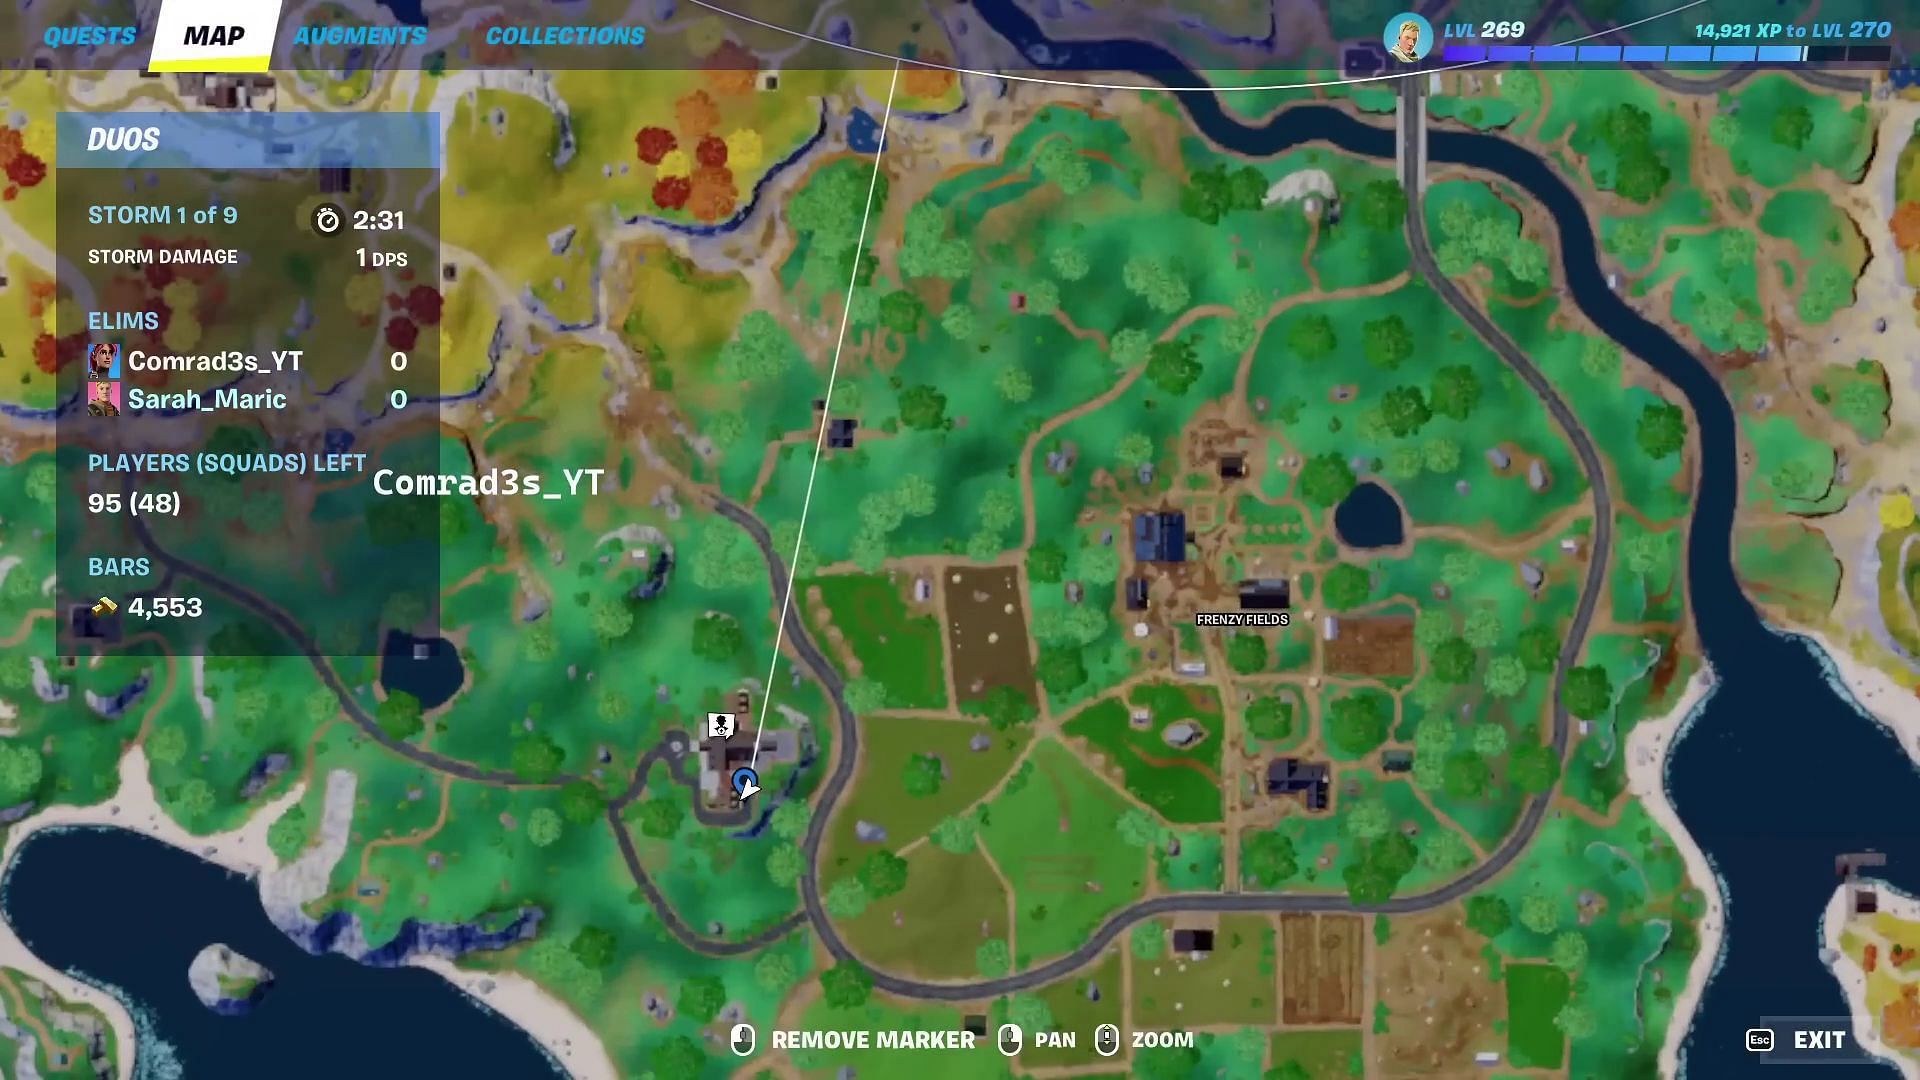 Marked the location of the Dirt Bike on the Fortnite map. (Image via YouTube/Comrad3s)